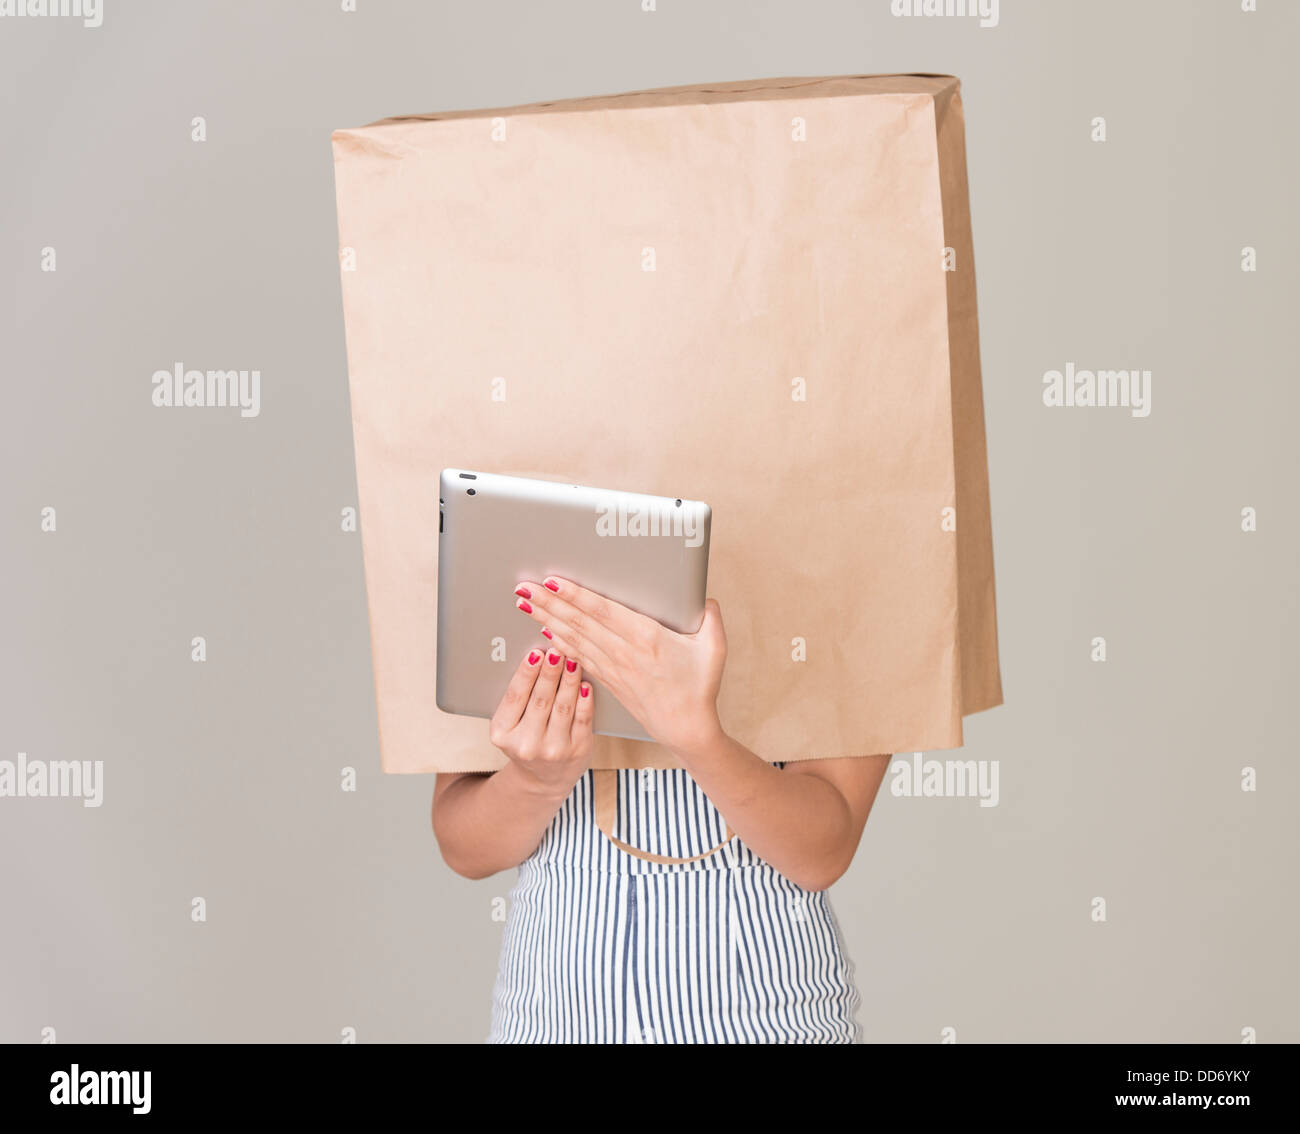 Anonymous internet surfing. Young woman with paper bag over her head holding a tablet Stock Photo